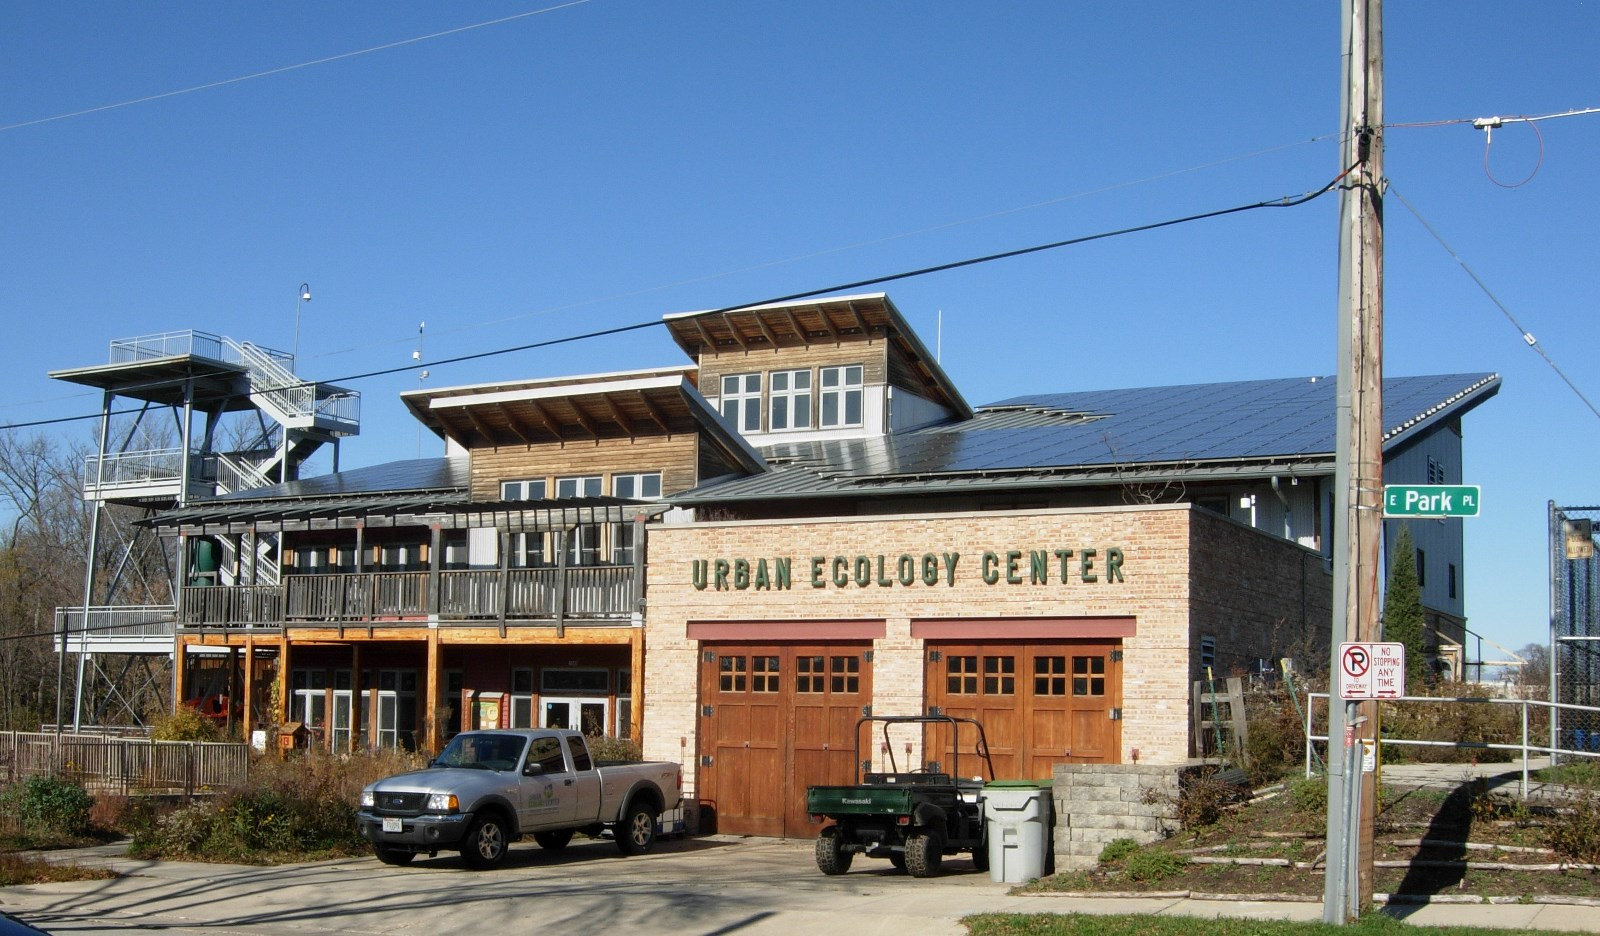 A 2012 photograph of the Urban Ecology Center's main building, constructed in 2004 in Riverside Park.